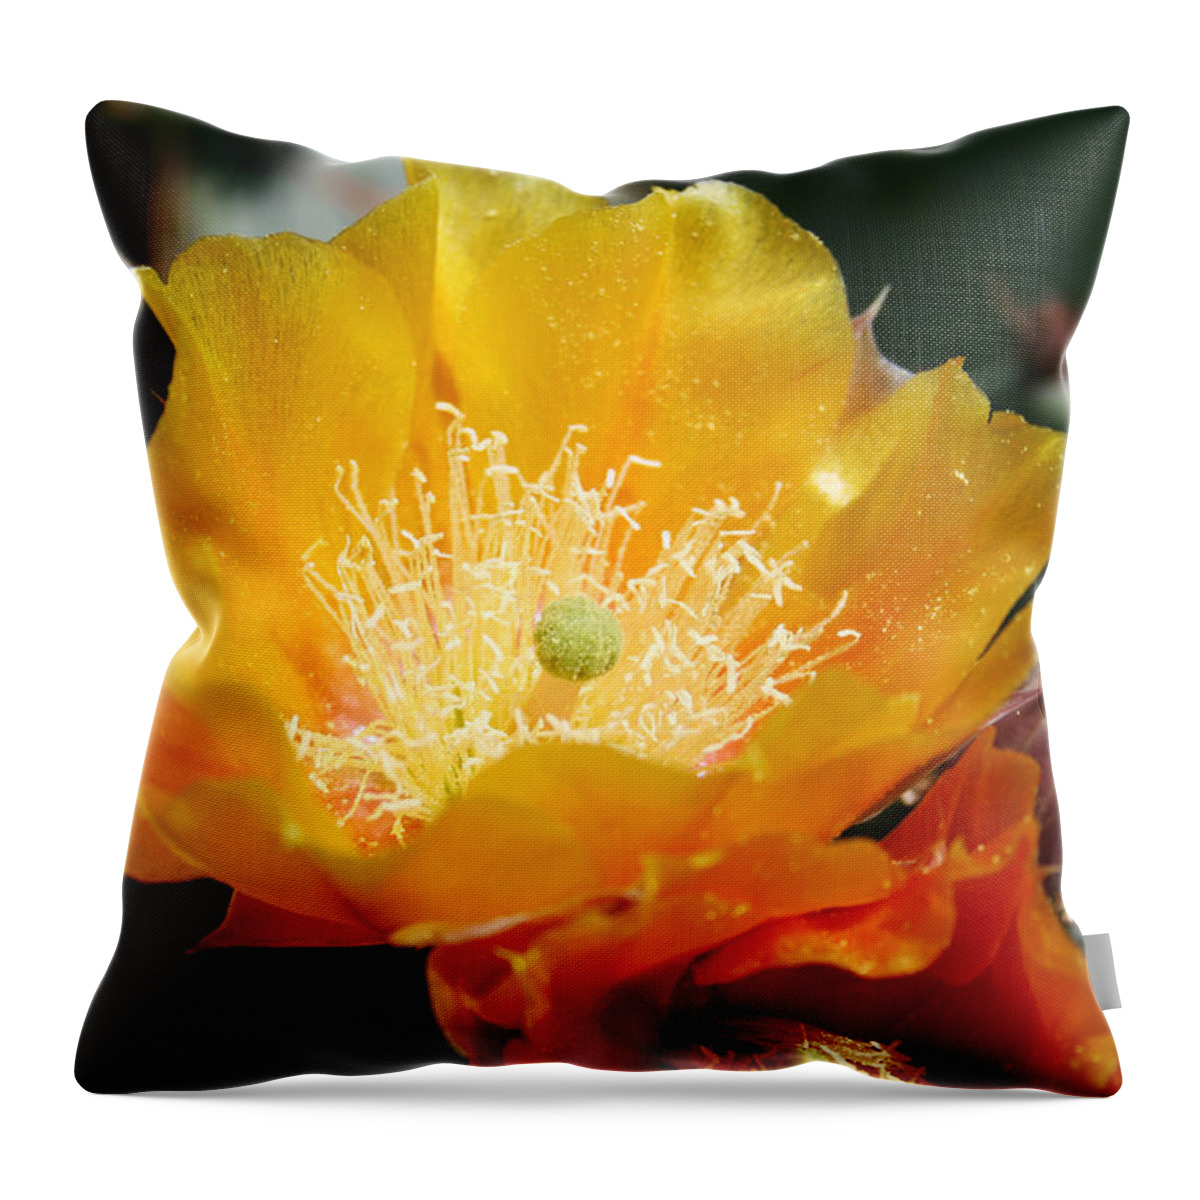 Prickly Pear Blossom Throw Pillow featuring the photograph Prickly Pear Blossom by Ellen Henneke